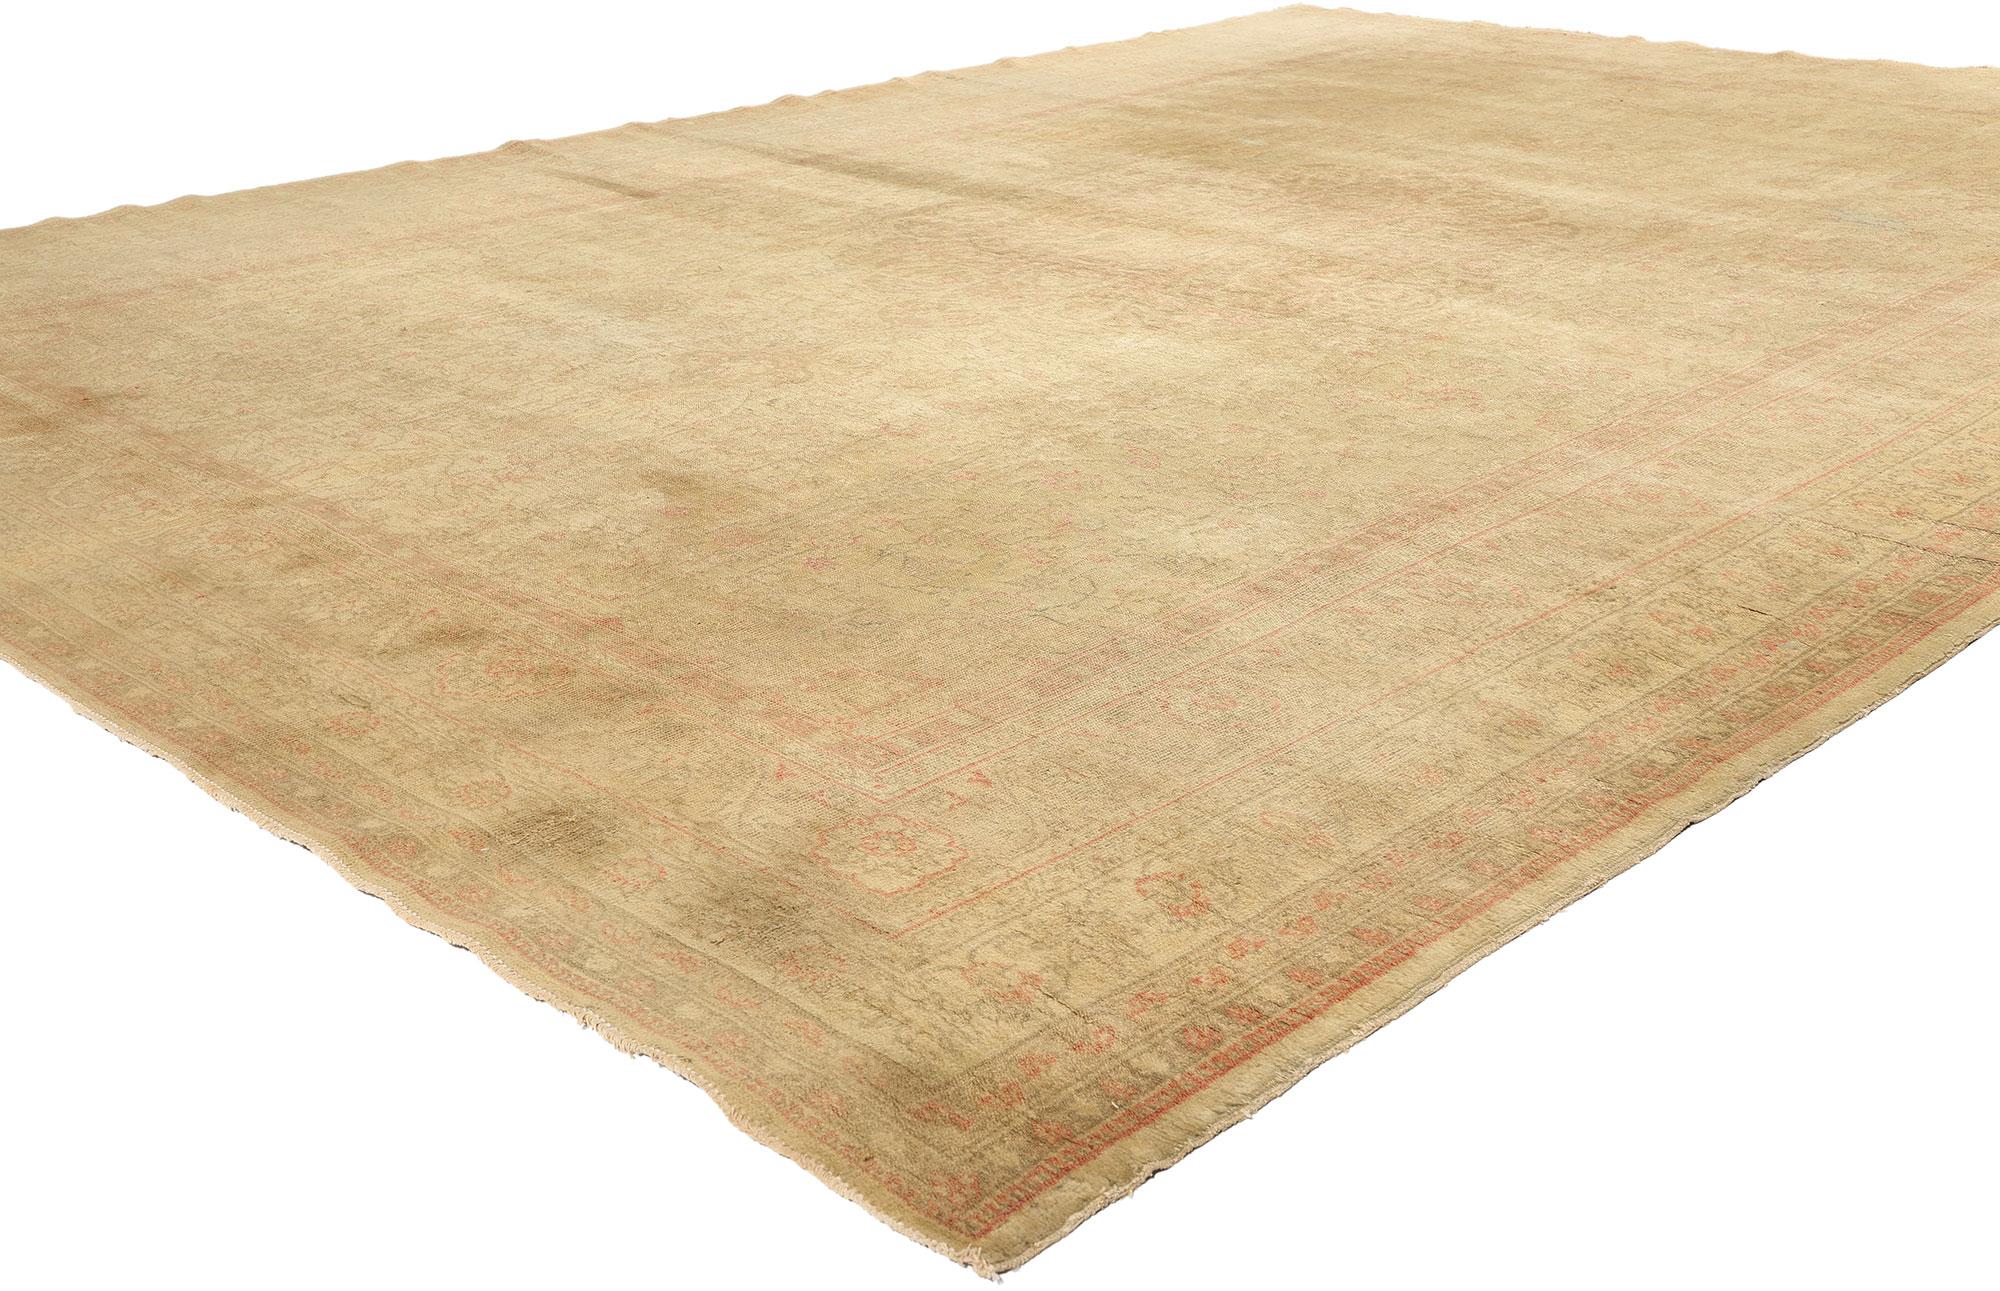 73154 Antique Turkish Sivas Rug, 09'10 x 13'06. With roots tracing back to Sivas in central Anatolia, Turkey, antique-wash Turkish Sivas rugs emanate vintage allure, courtesy of a unique treatment process. Embracing a sense of laid-back elegance,